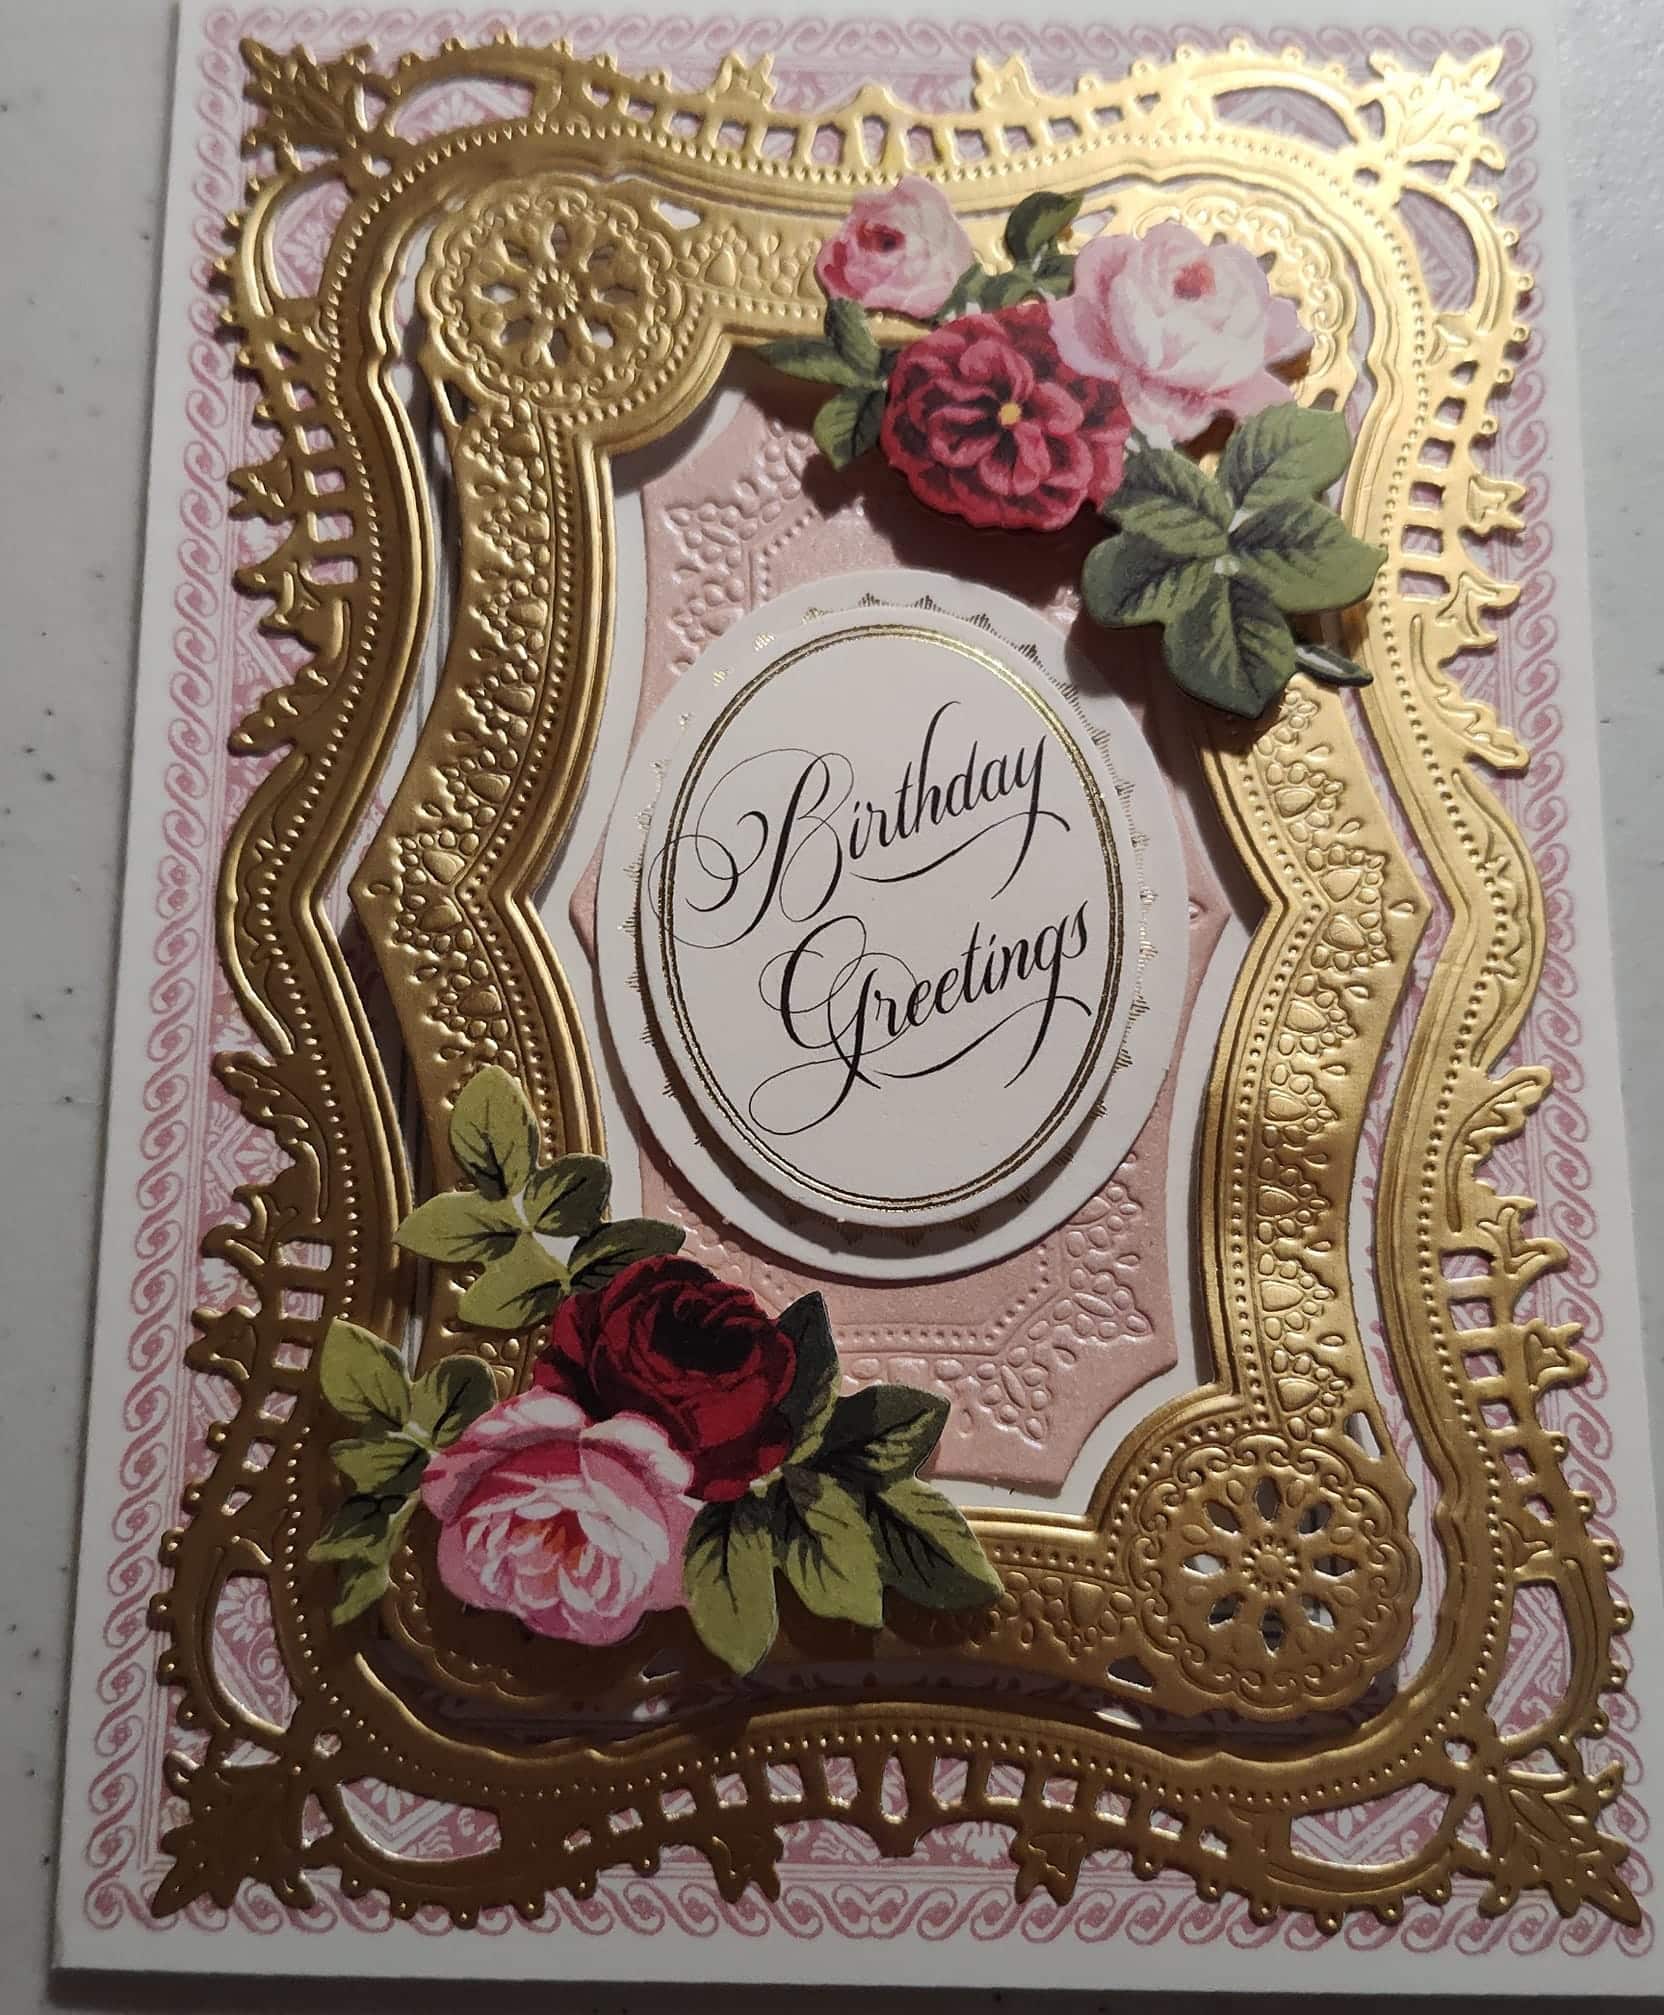 A pink and gold wedding card with roses.